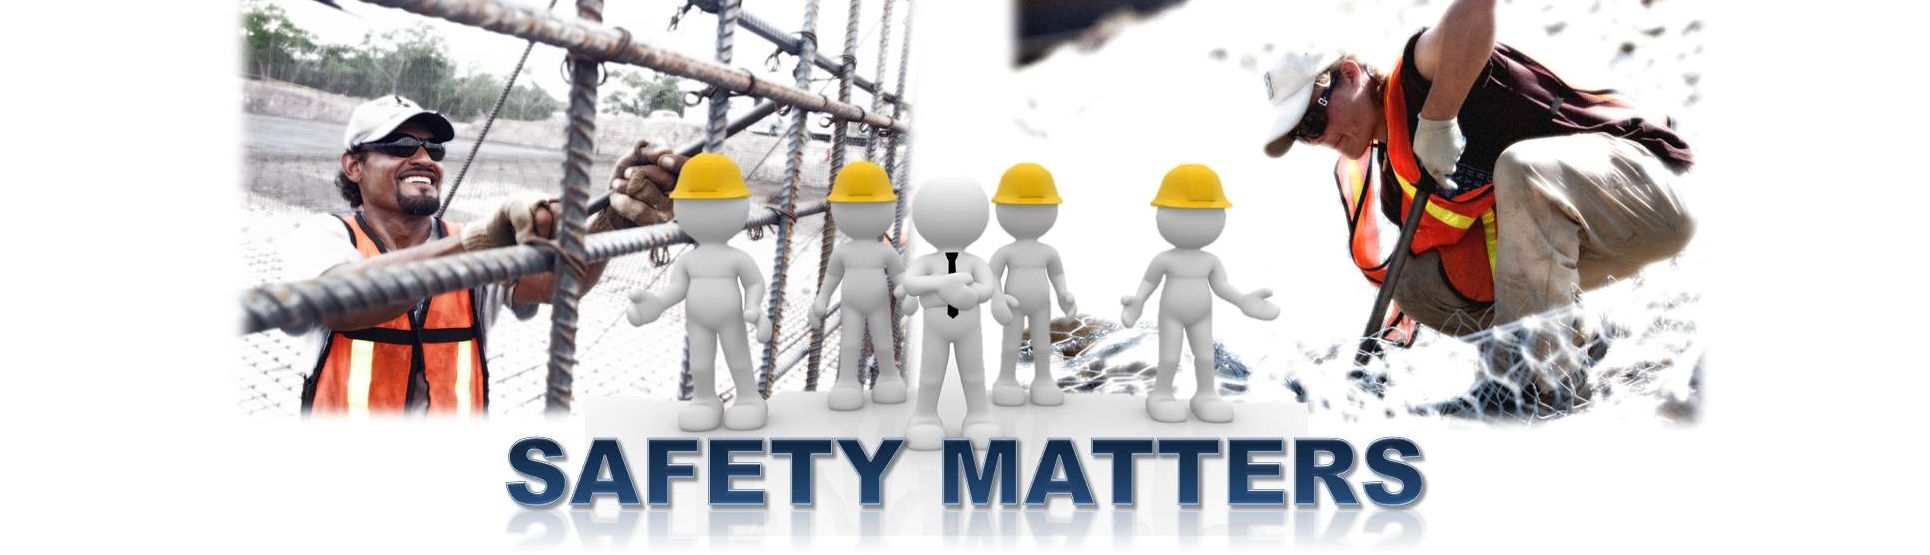 safety matters